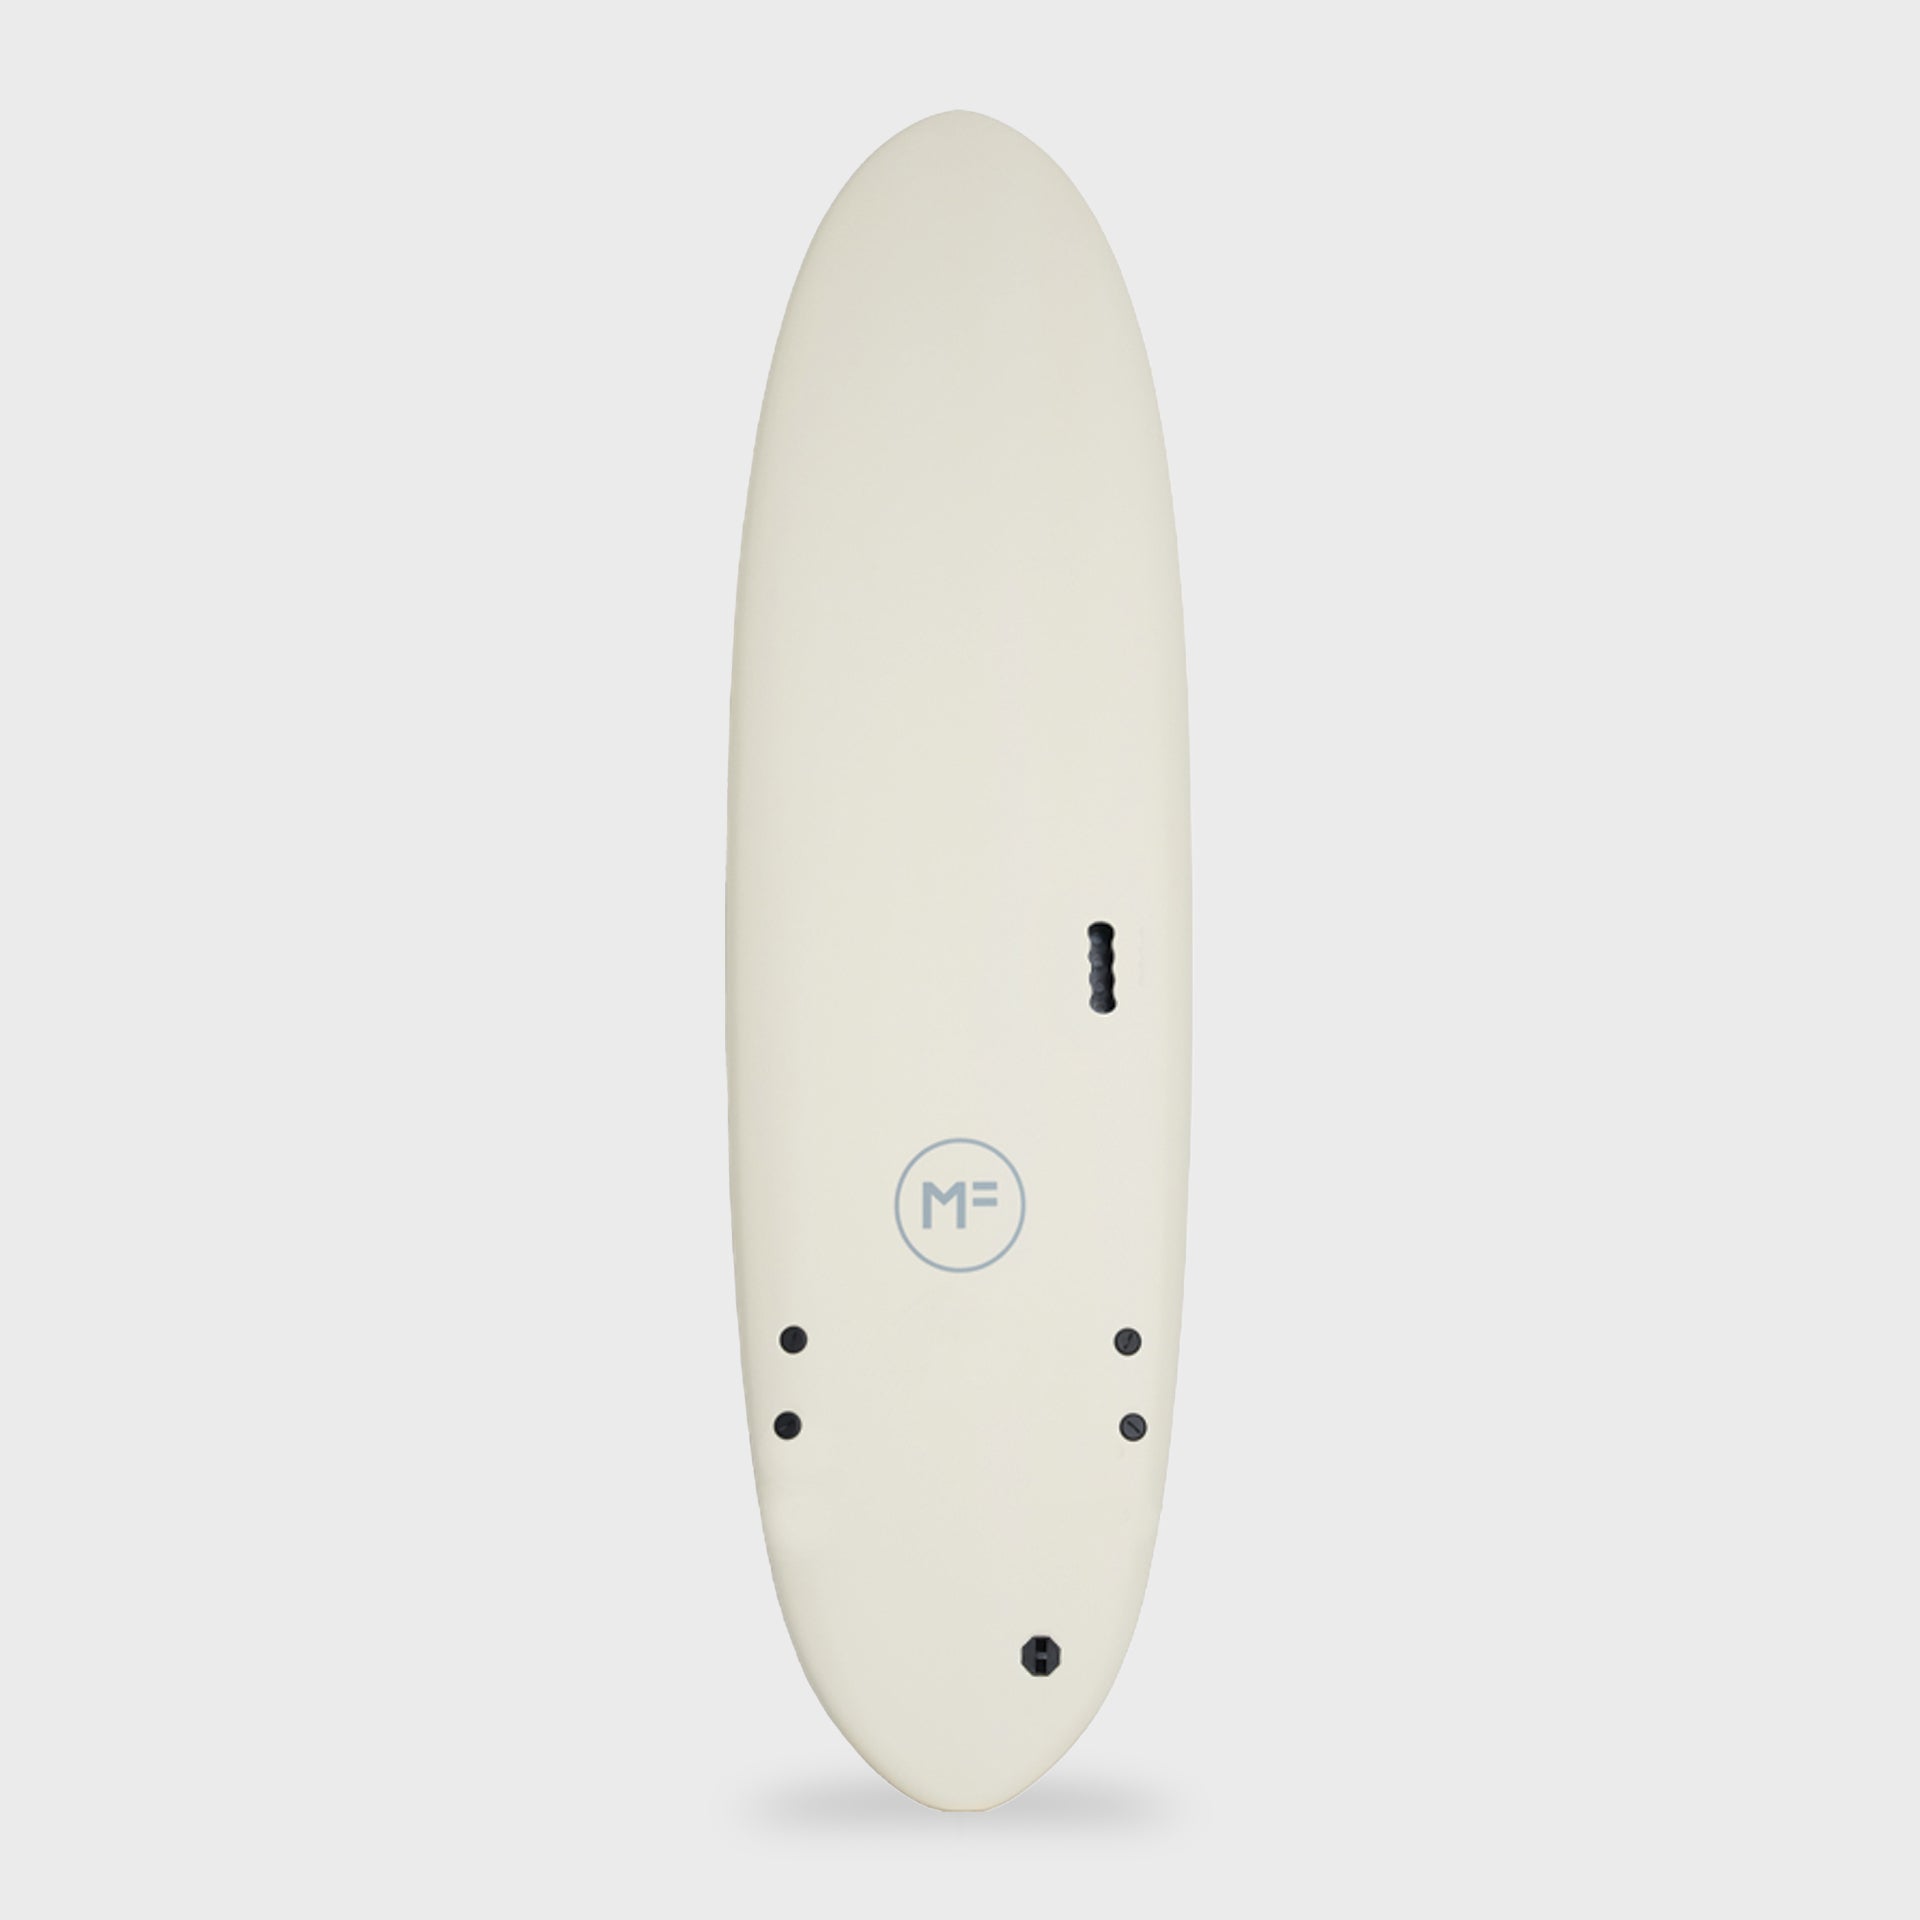 Alley Cat Super Soft - Softboard - 7'0, 7'6 and 8'0 - White/Grey - ManGo Surfing